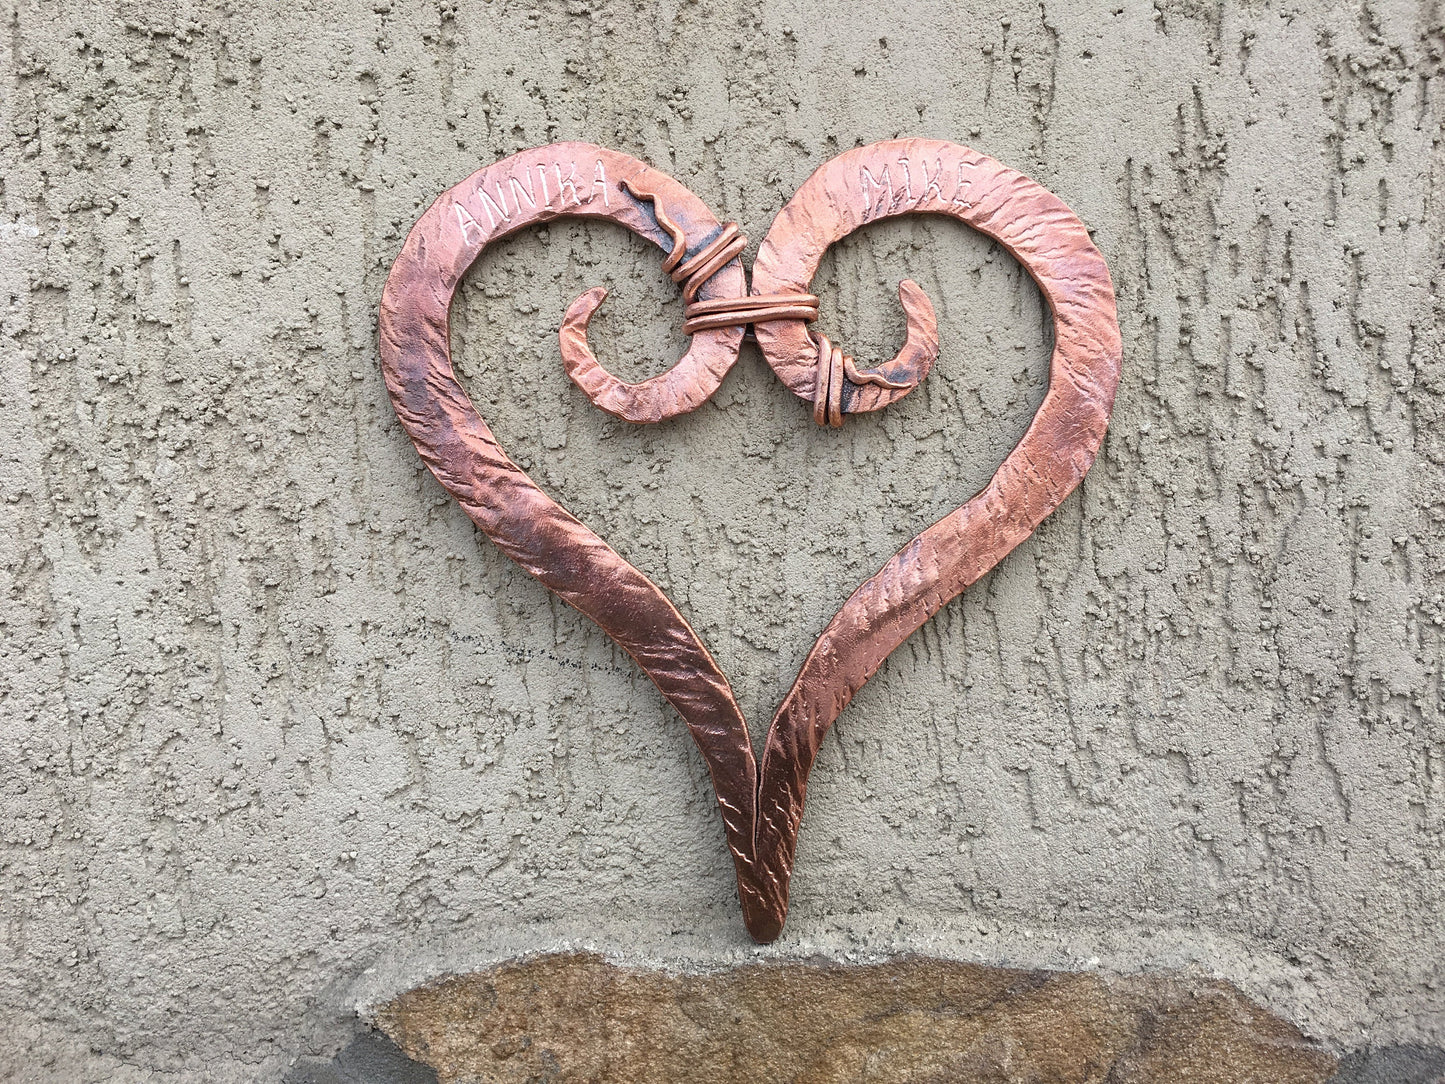 Copper gift, 7 year gift, 7th anniversary gift, copper anniversary gift, copper heart, copper gifts, copper gift for her, copper wedding